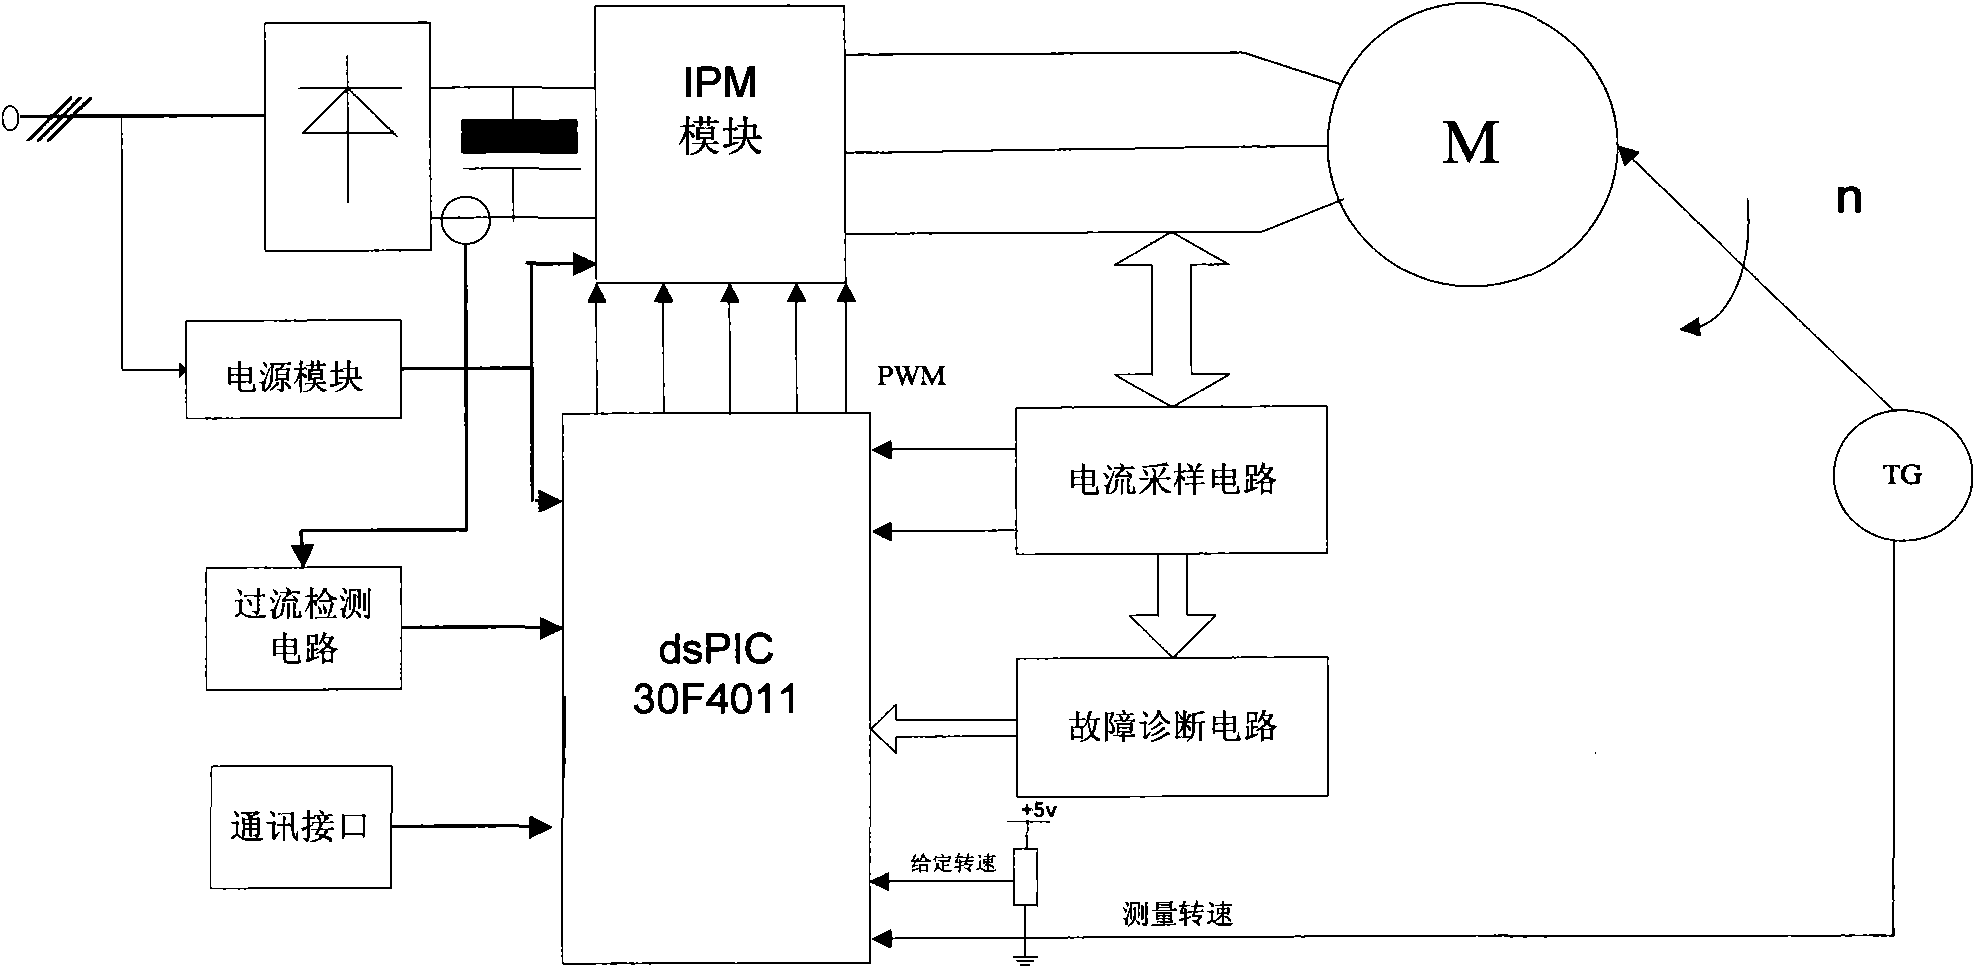 Singlechip-based induction motor variable frequency speed regulation control system